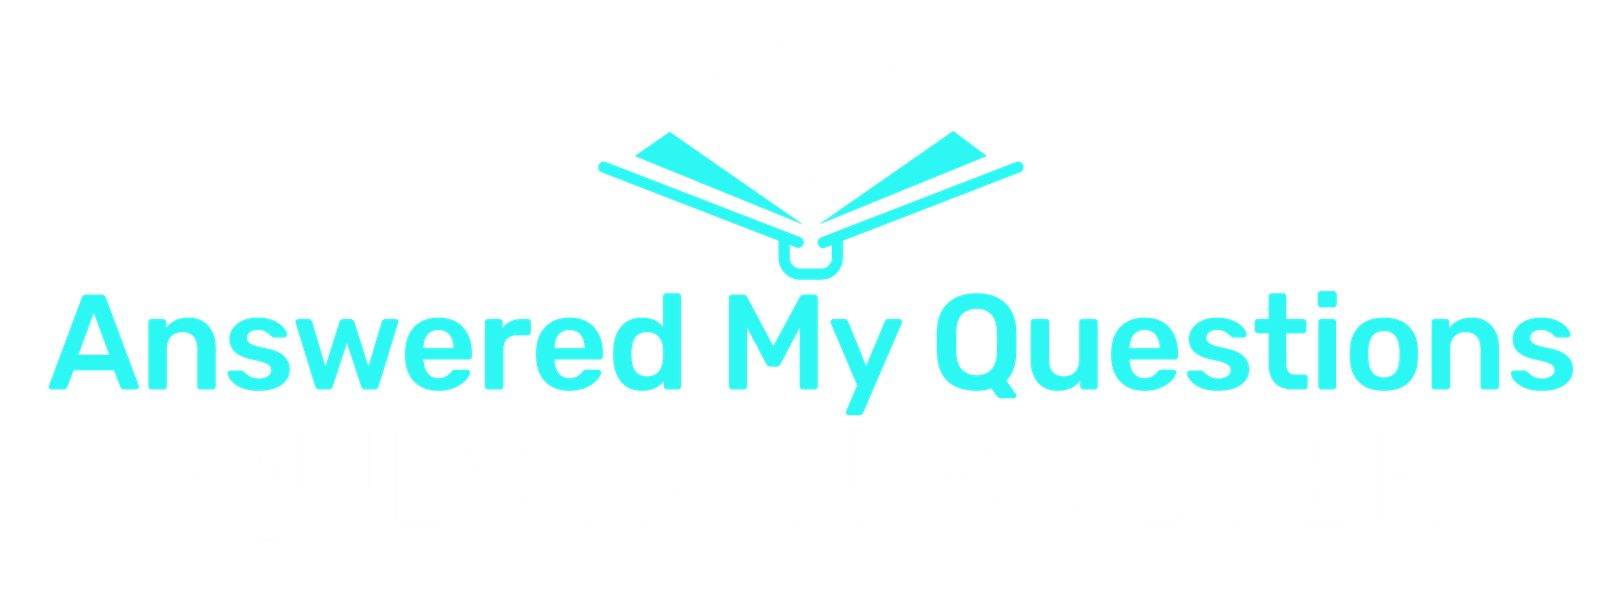 Answered My Questions Logo